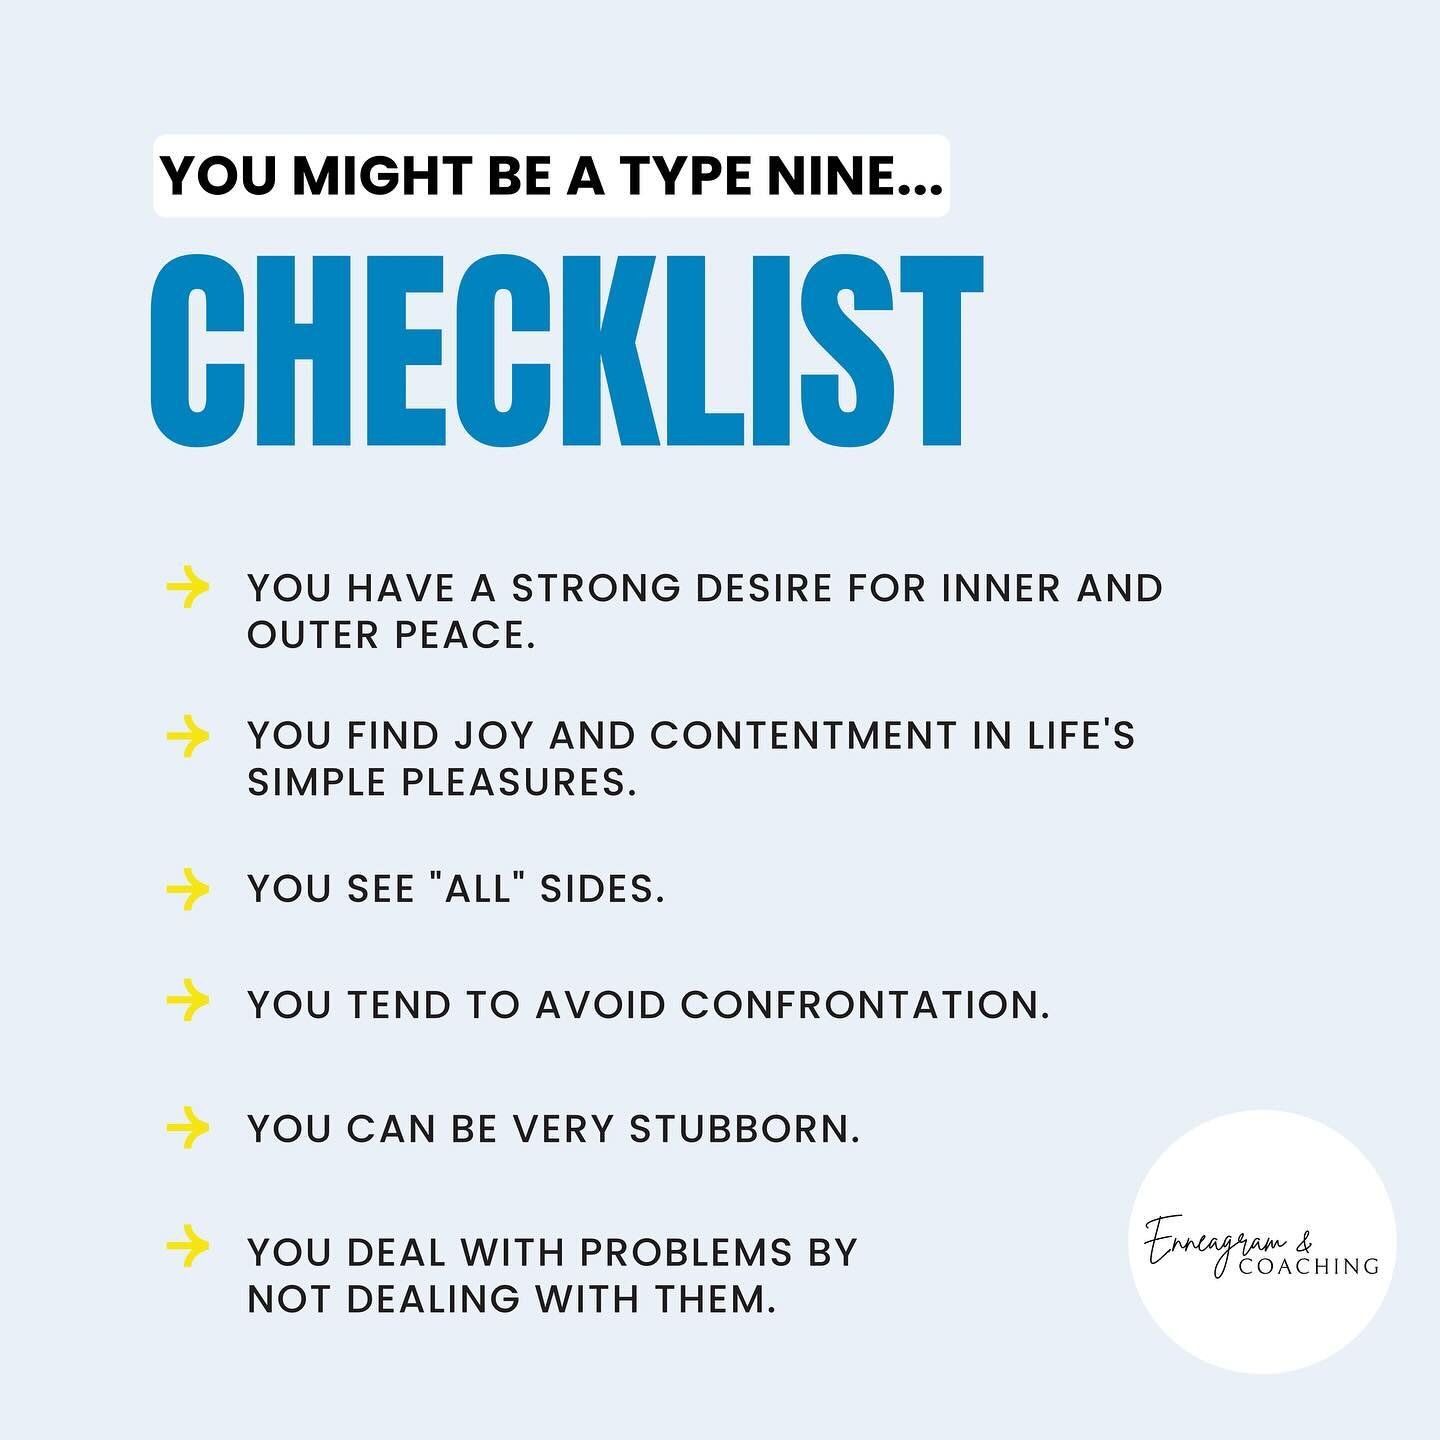 ✨Enneagram Checklist ✨

 &ldquo;All 9 Enneagram Types&rdquo; What is your type and which one do you most relate too???⤵️ 

#enneagramtype #enneagramtypes  #enneagram #personalitytypes  #enneagram9 #enneagram4 #enneagram2 #enneagram1 #enneagram3 #enne